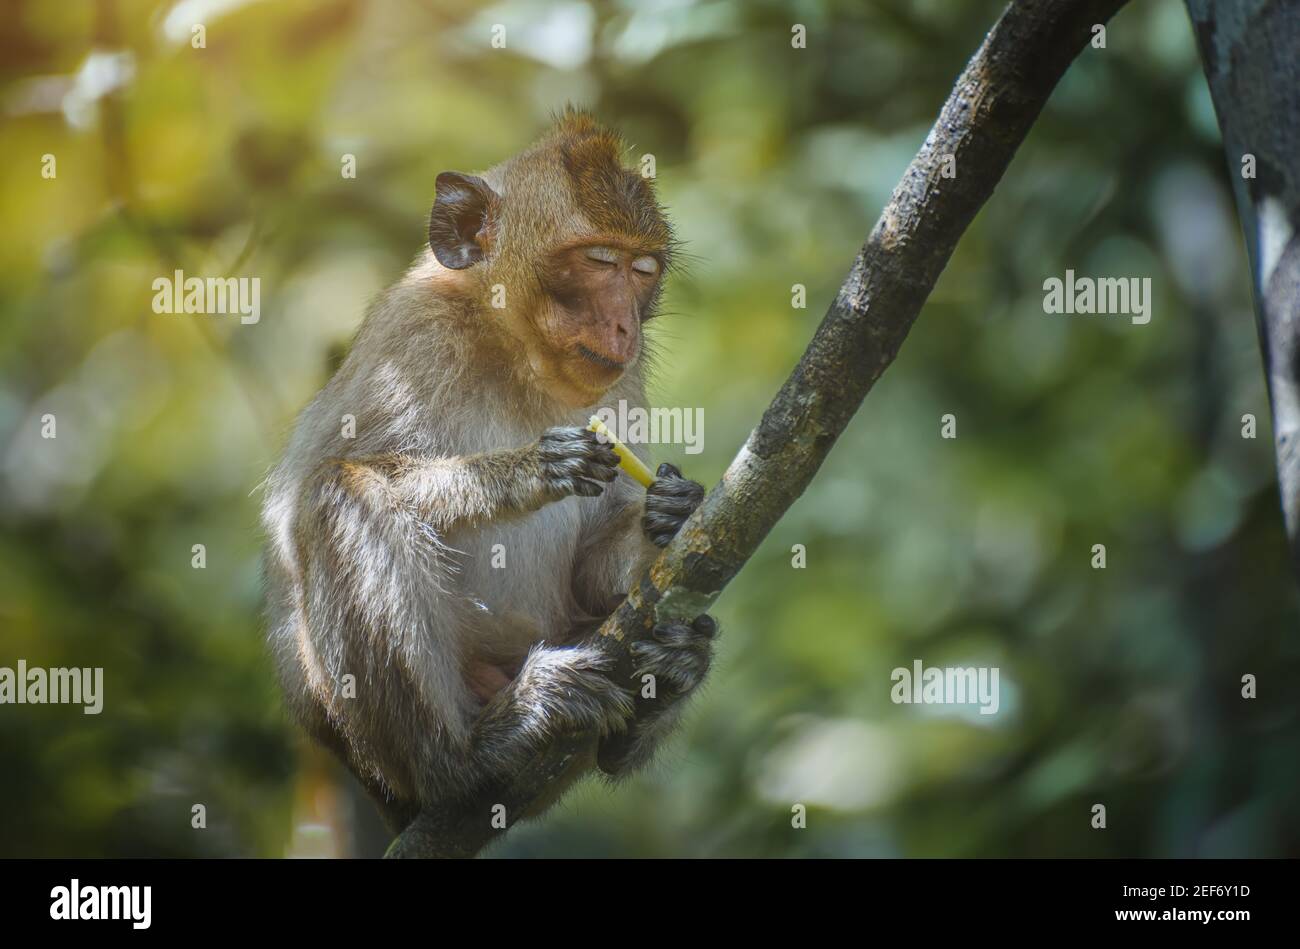 Asian Macaque monkey relaxing on the branch in the forest. Stock Photo